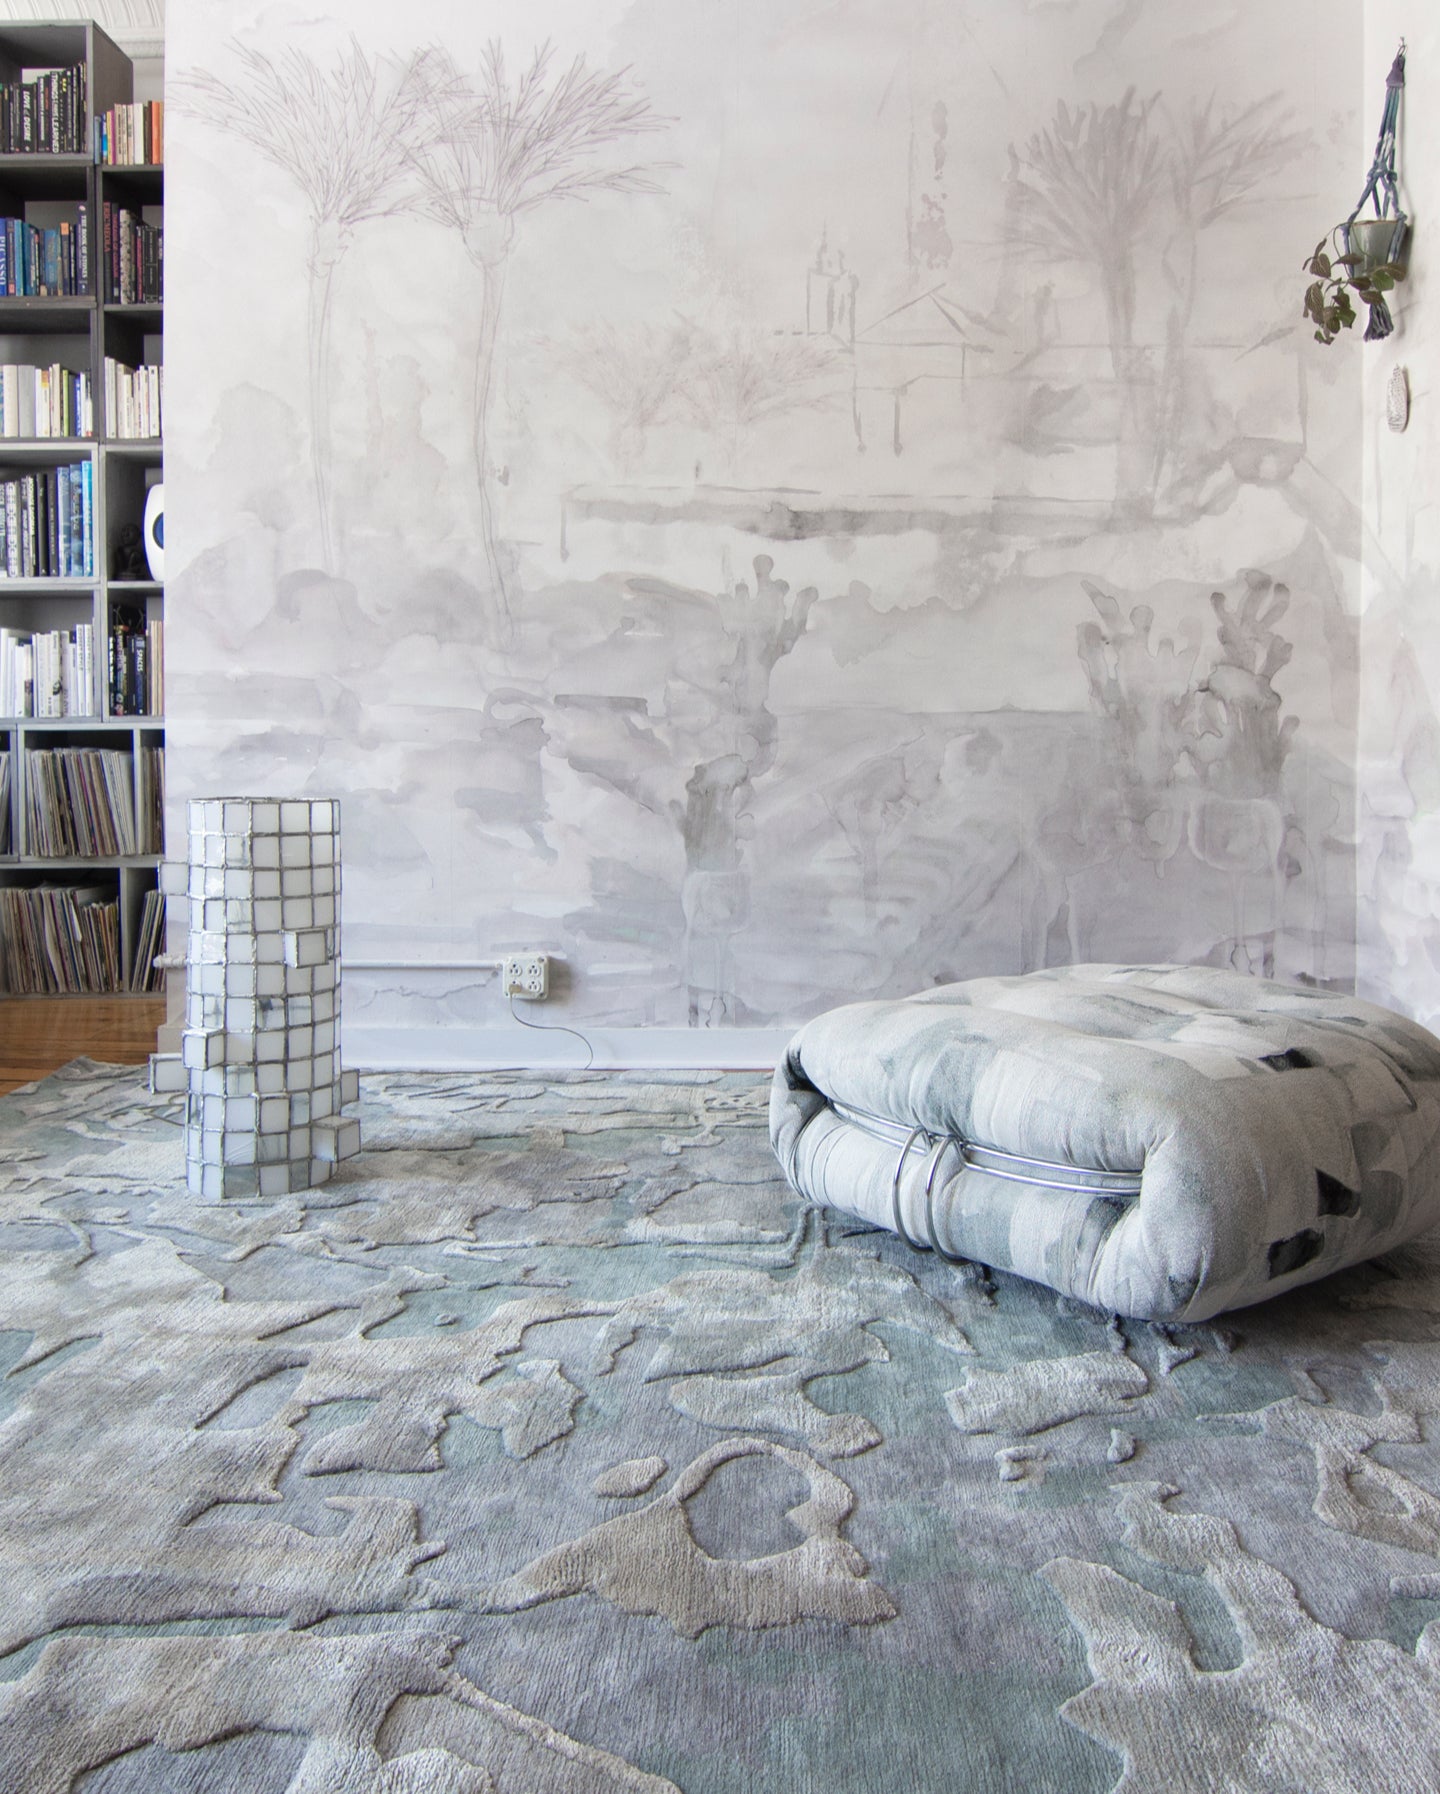 A room with a rug and bookshelves